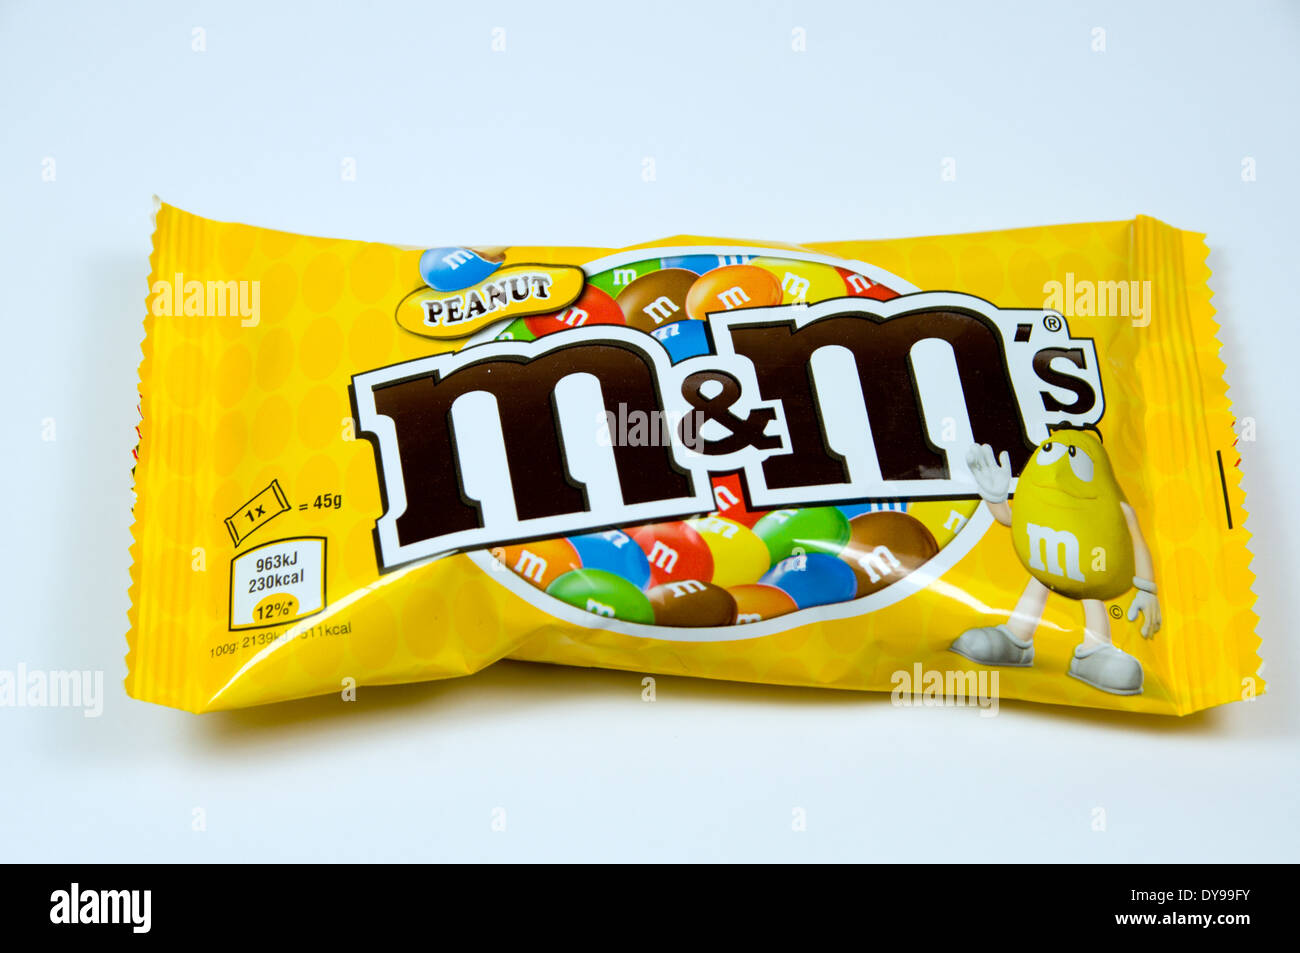 Packet of m&m's sweets. Stock Photo